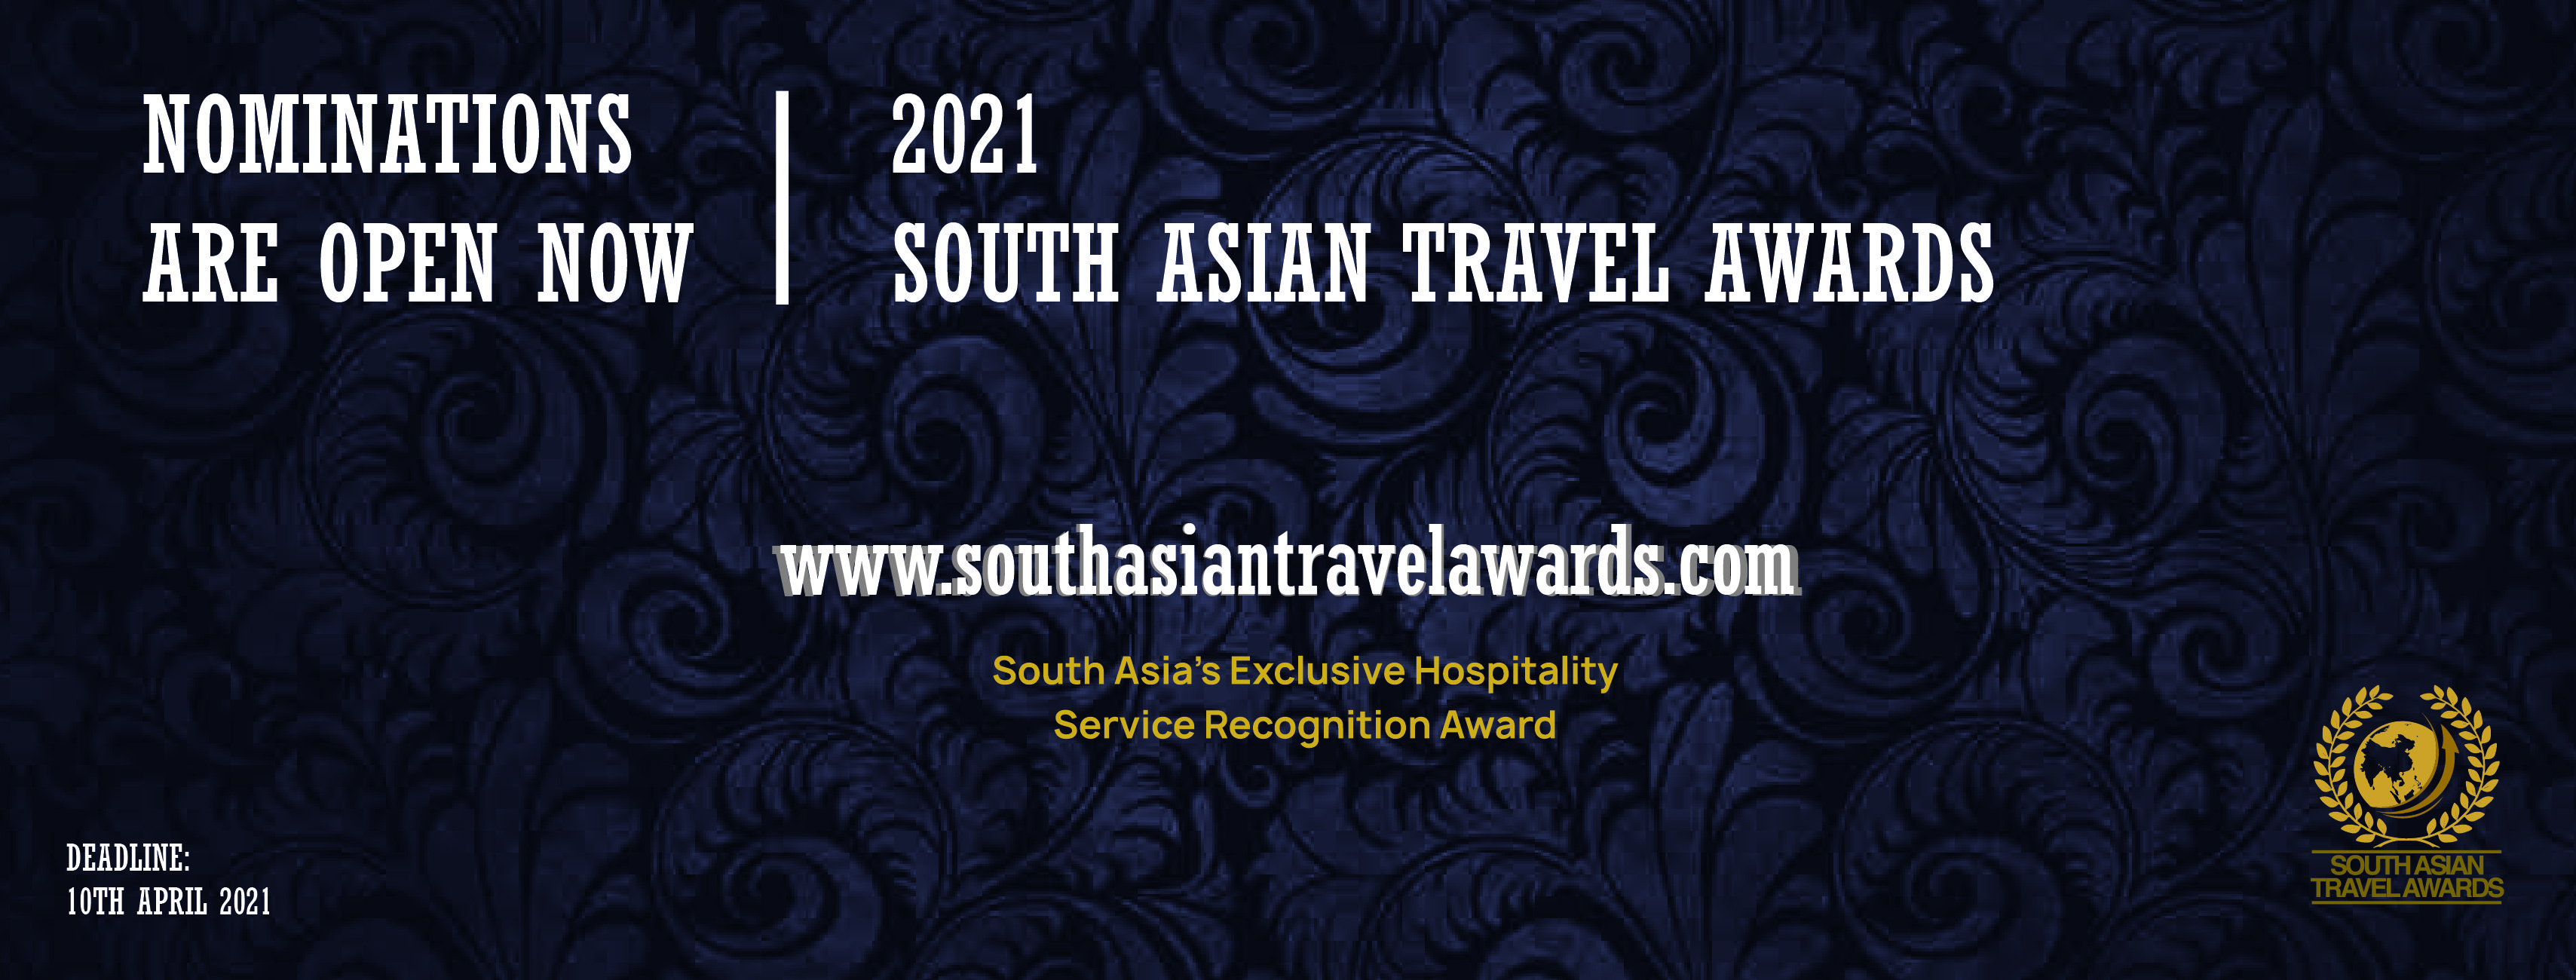 SOUTH ASIAN TRAVEL AWARDS OPENS NOMINATIONS FOR 2021